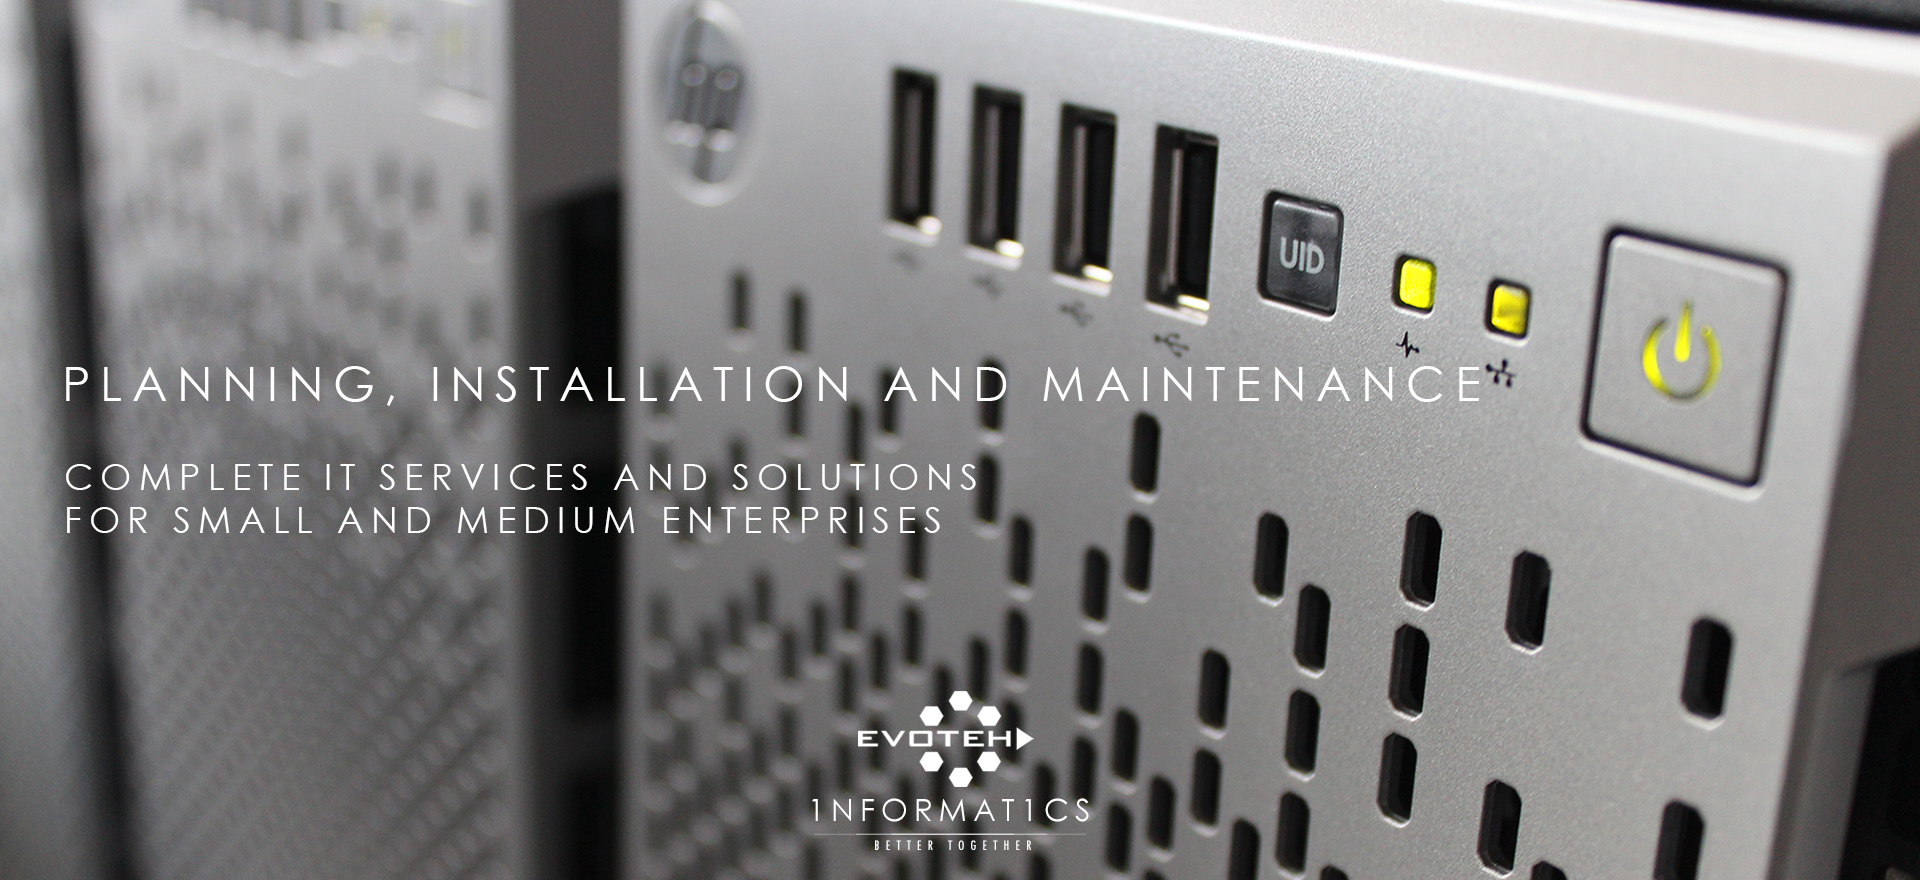 Planning, Installation and Maintainance. Complete IT Services and Solutions for Small and Midsize Business